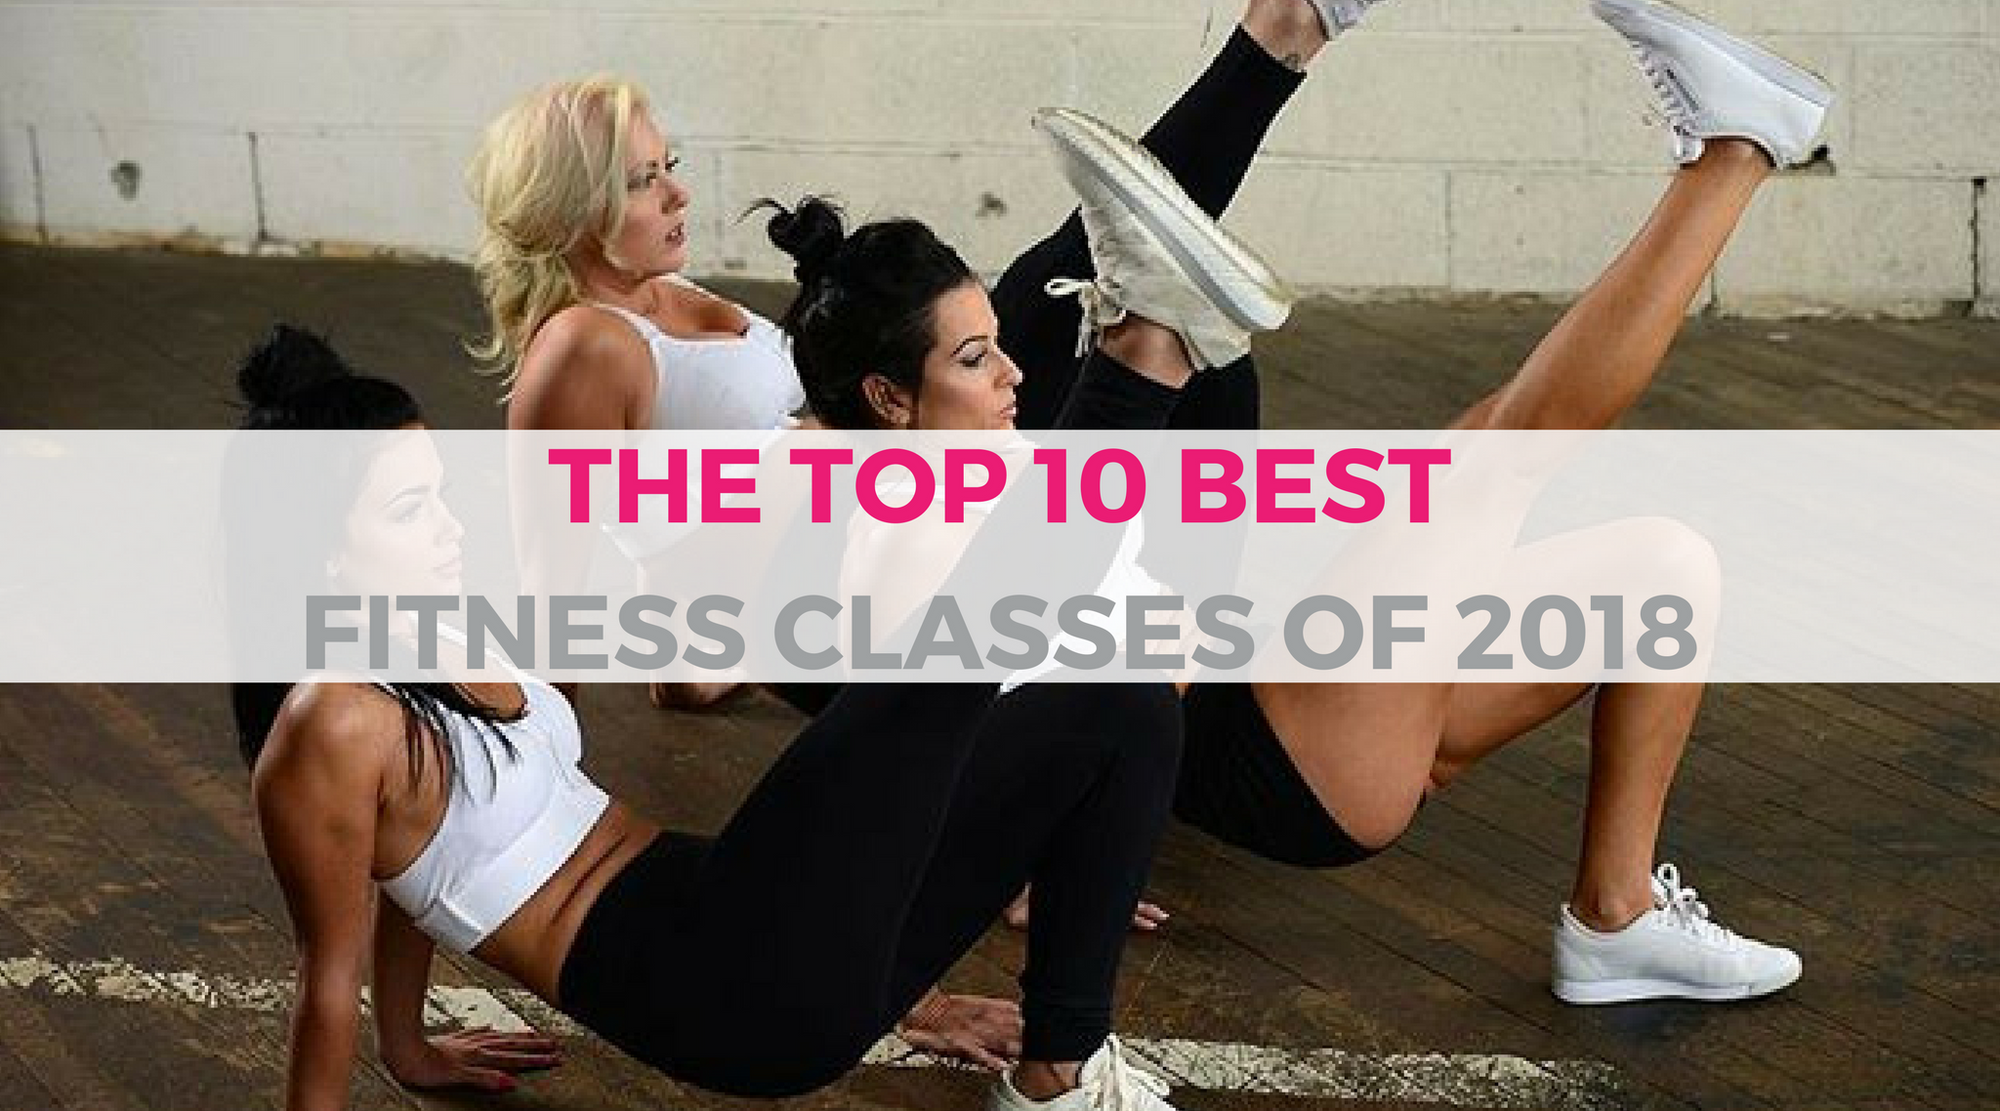 With the #NewYear comes a new you – & that often includes motivation to put your health first & embark on a new fitness routine. But there are so many #GroupFitness classes out there, not to mention the latest celebrity crazes in the #workout world. So ho